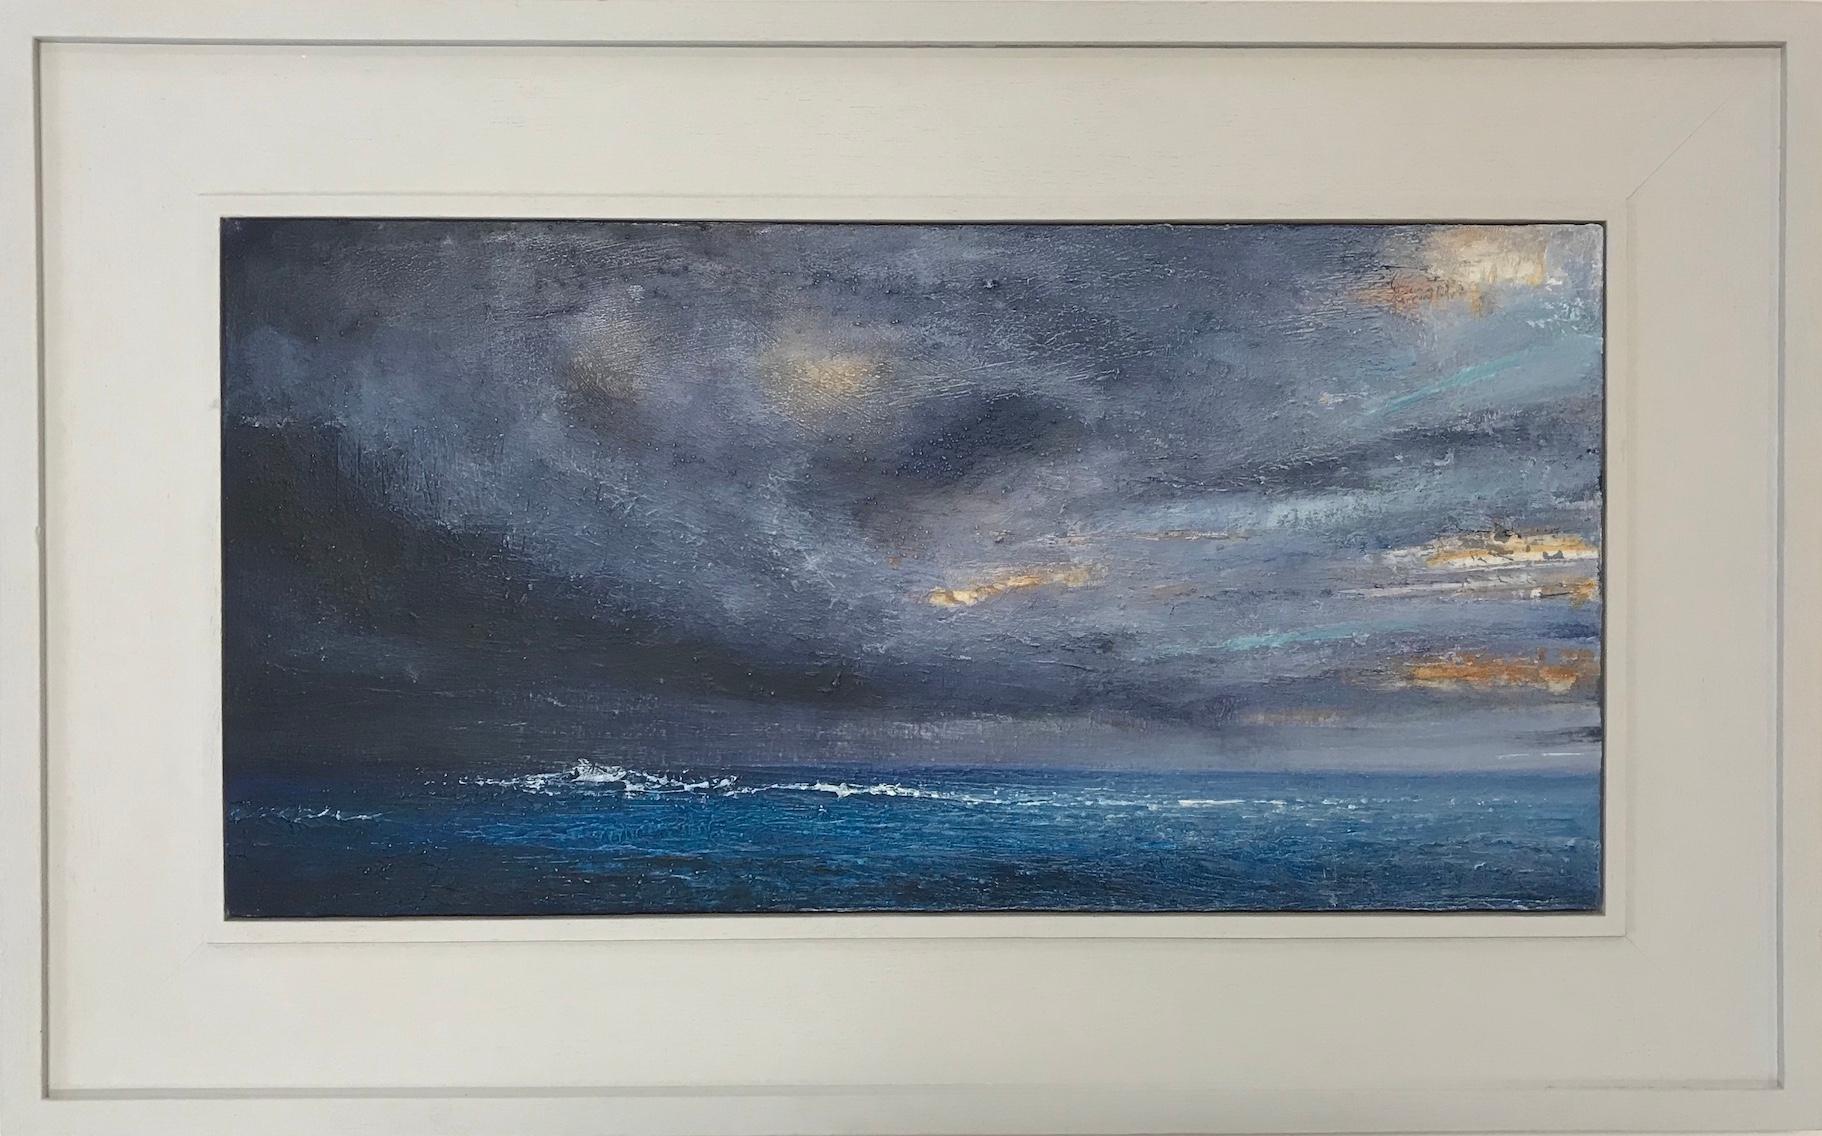 Alison Groom
Tropical Storm
Original Painting
Oil over Acrylic Textured Ground on Board
Image Size: H 26cm x W 51cm
Framed Size: H 42cm x W 67cm x D 3cm
Framed and Ready to Hang
Signed
Please note that any insitu images are purely an indication as